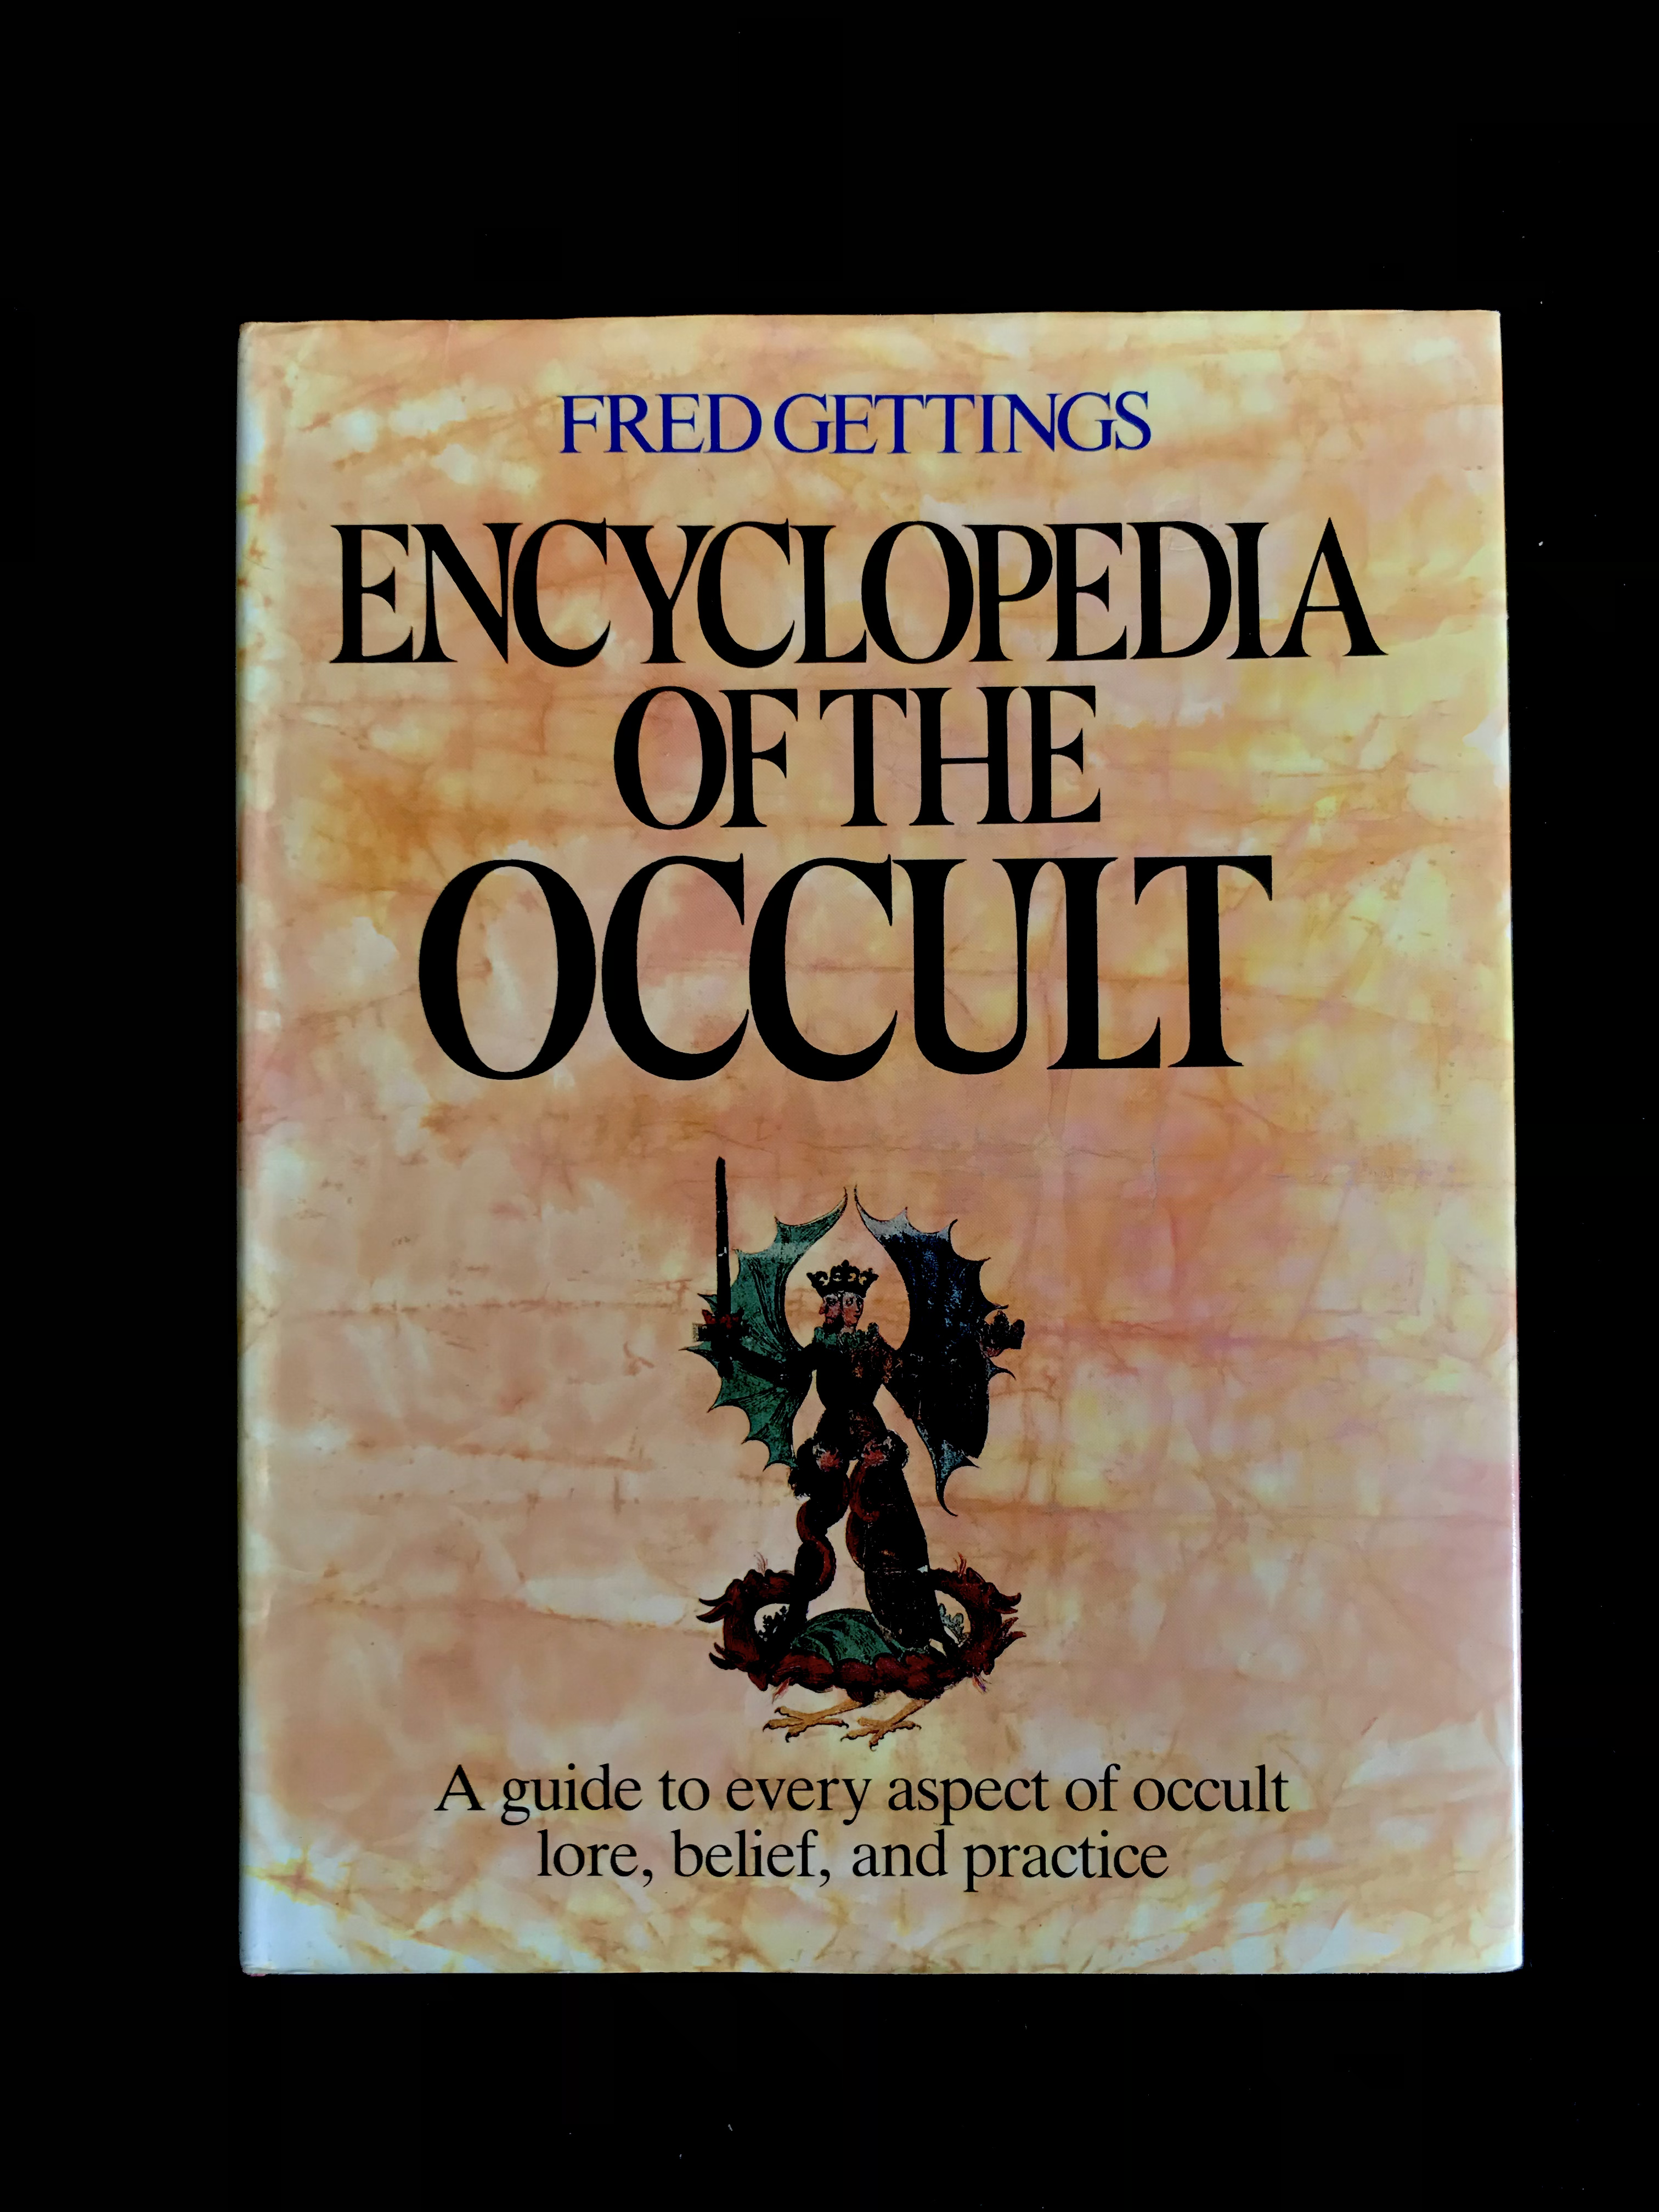 Encyclopaedia of The Occult by Fred Gettings